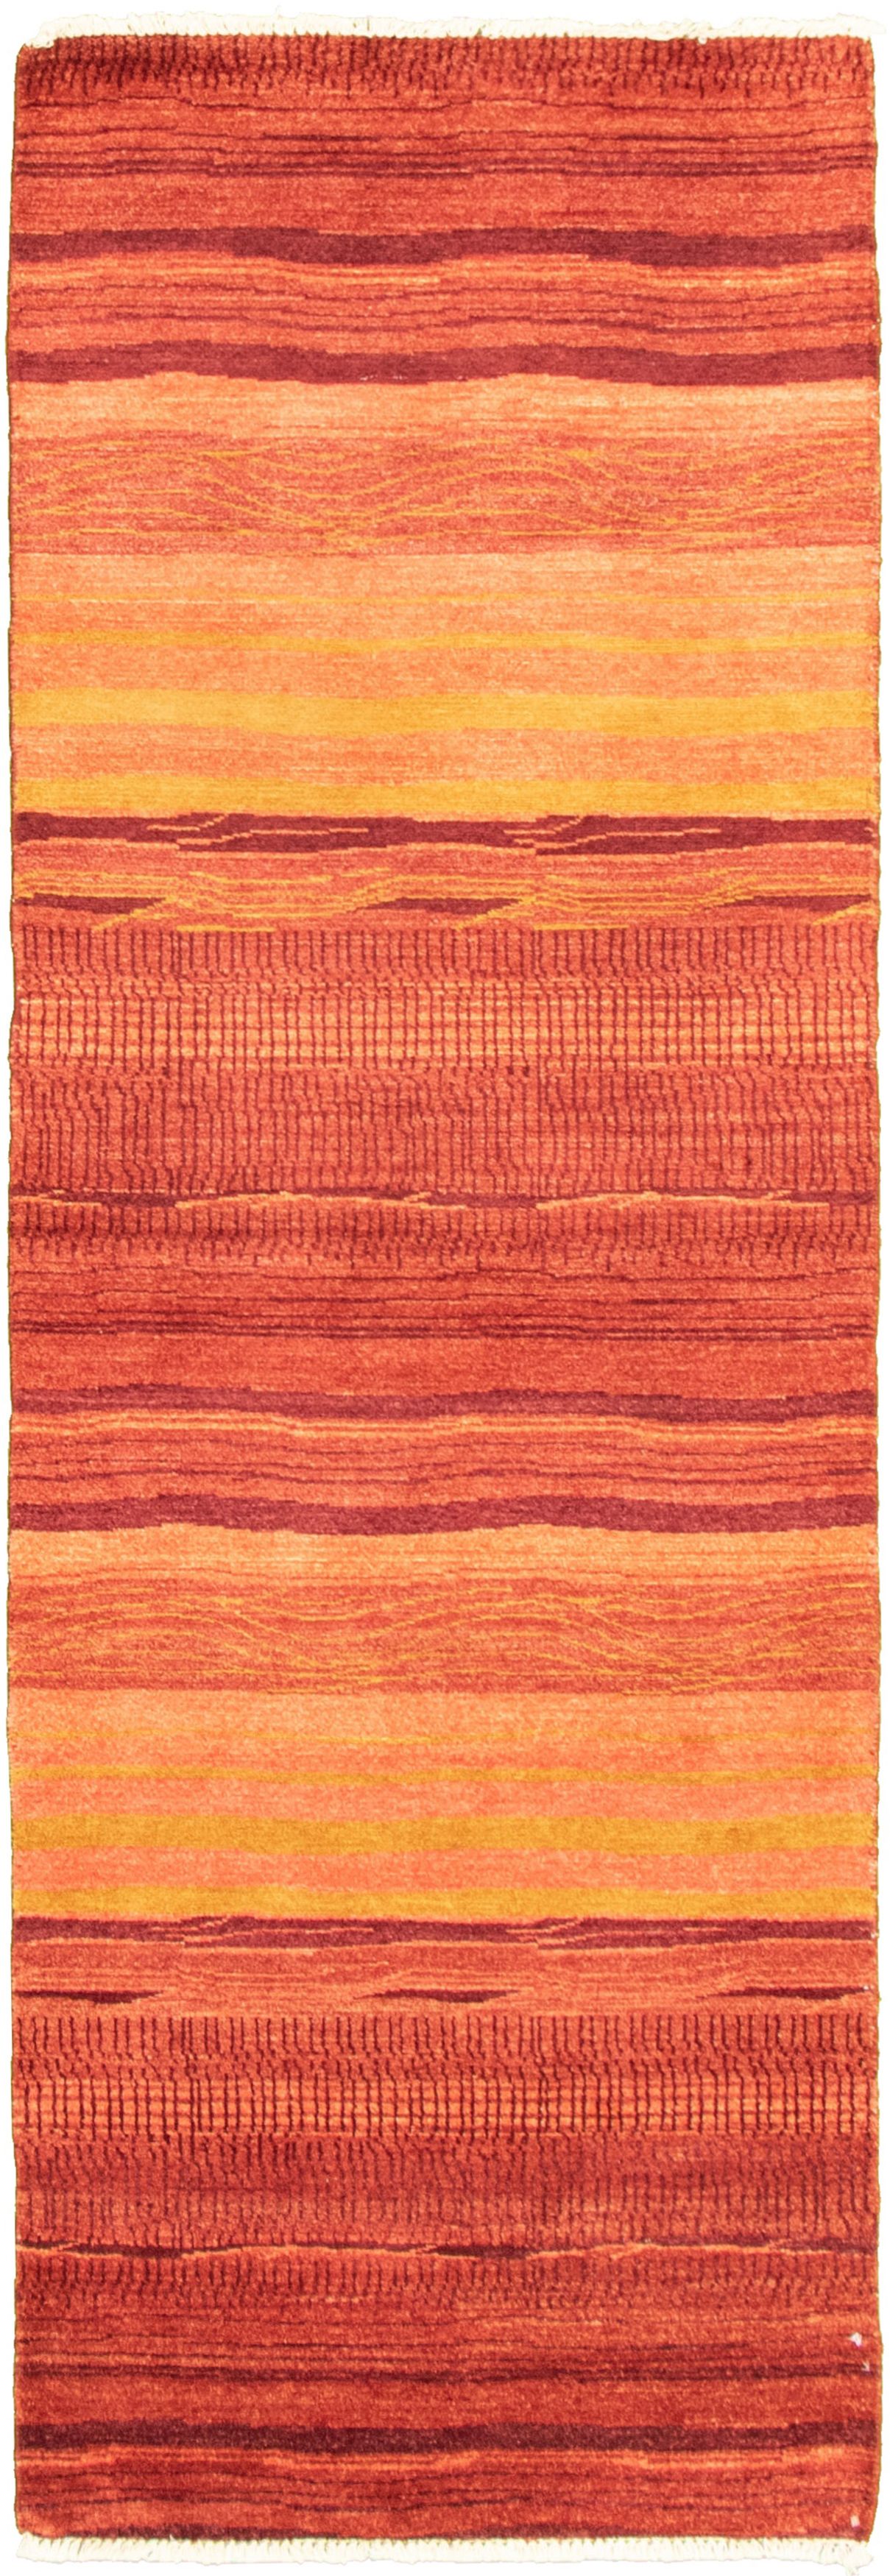 Hand-knotted Peshawar Ziegler Copper Wool Rug 2'6" x 7'10" Size: 2'6" x 7'10"  